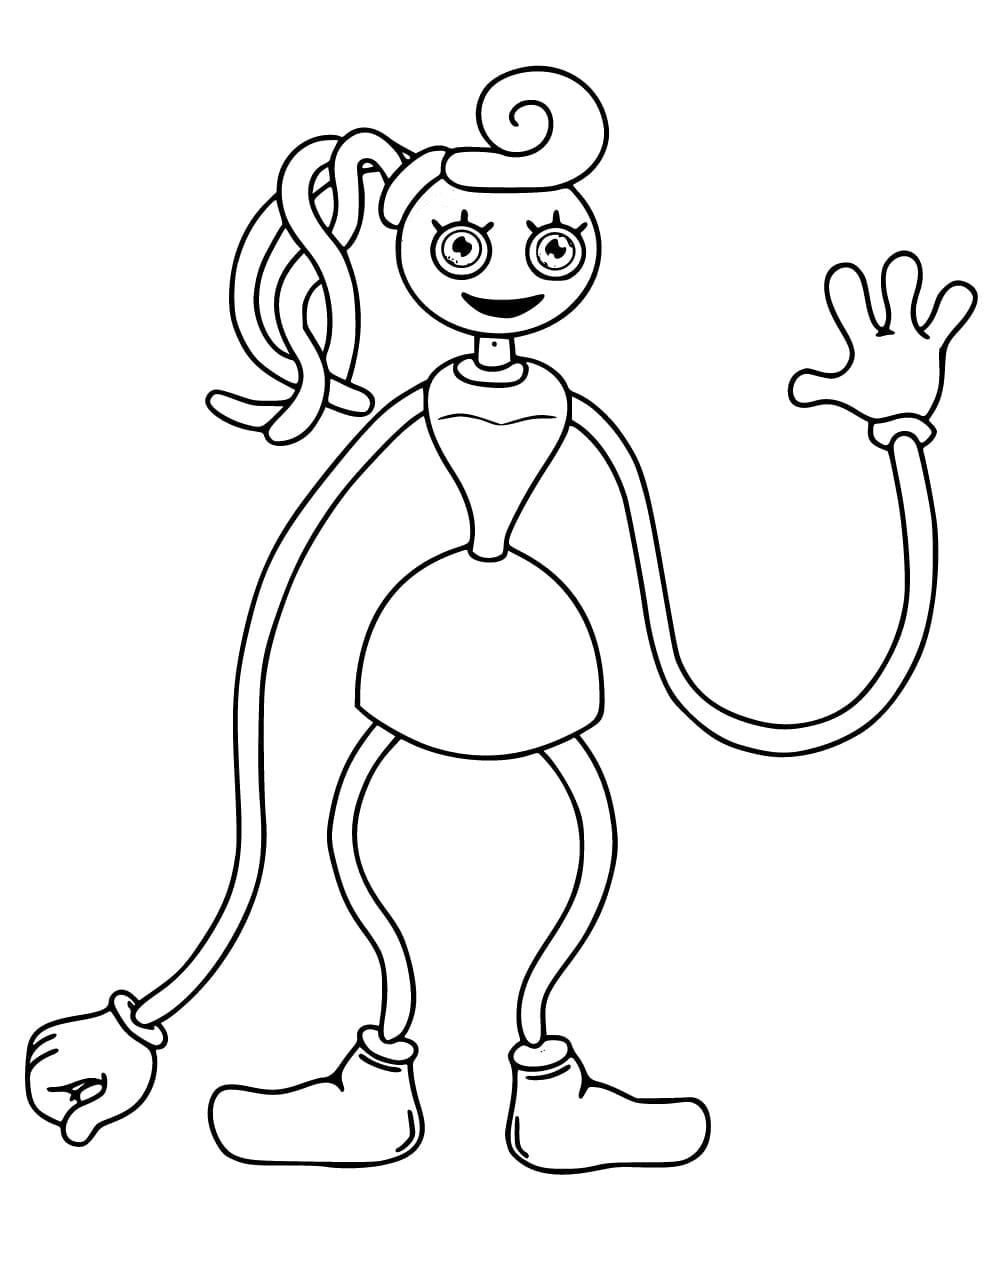 Mommy Long Legs Poppy Playtime PNG DXF Svgfiles (Instant Download) 